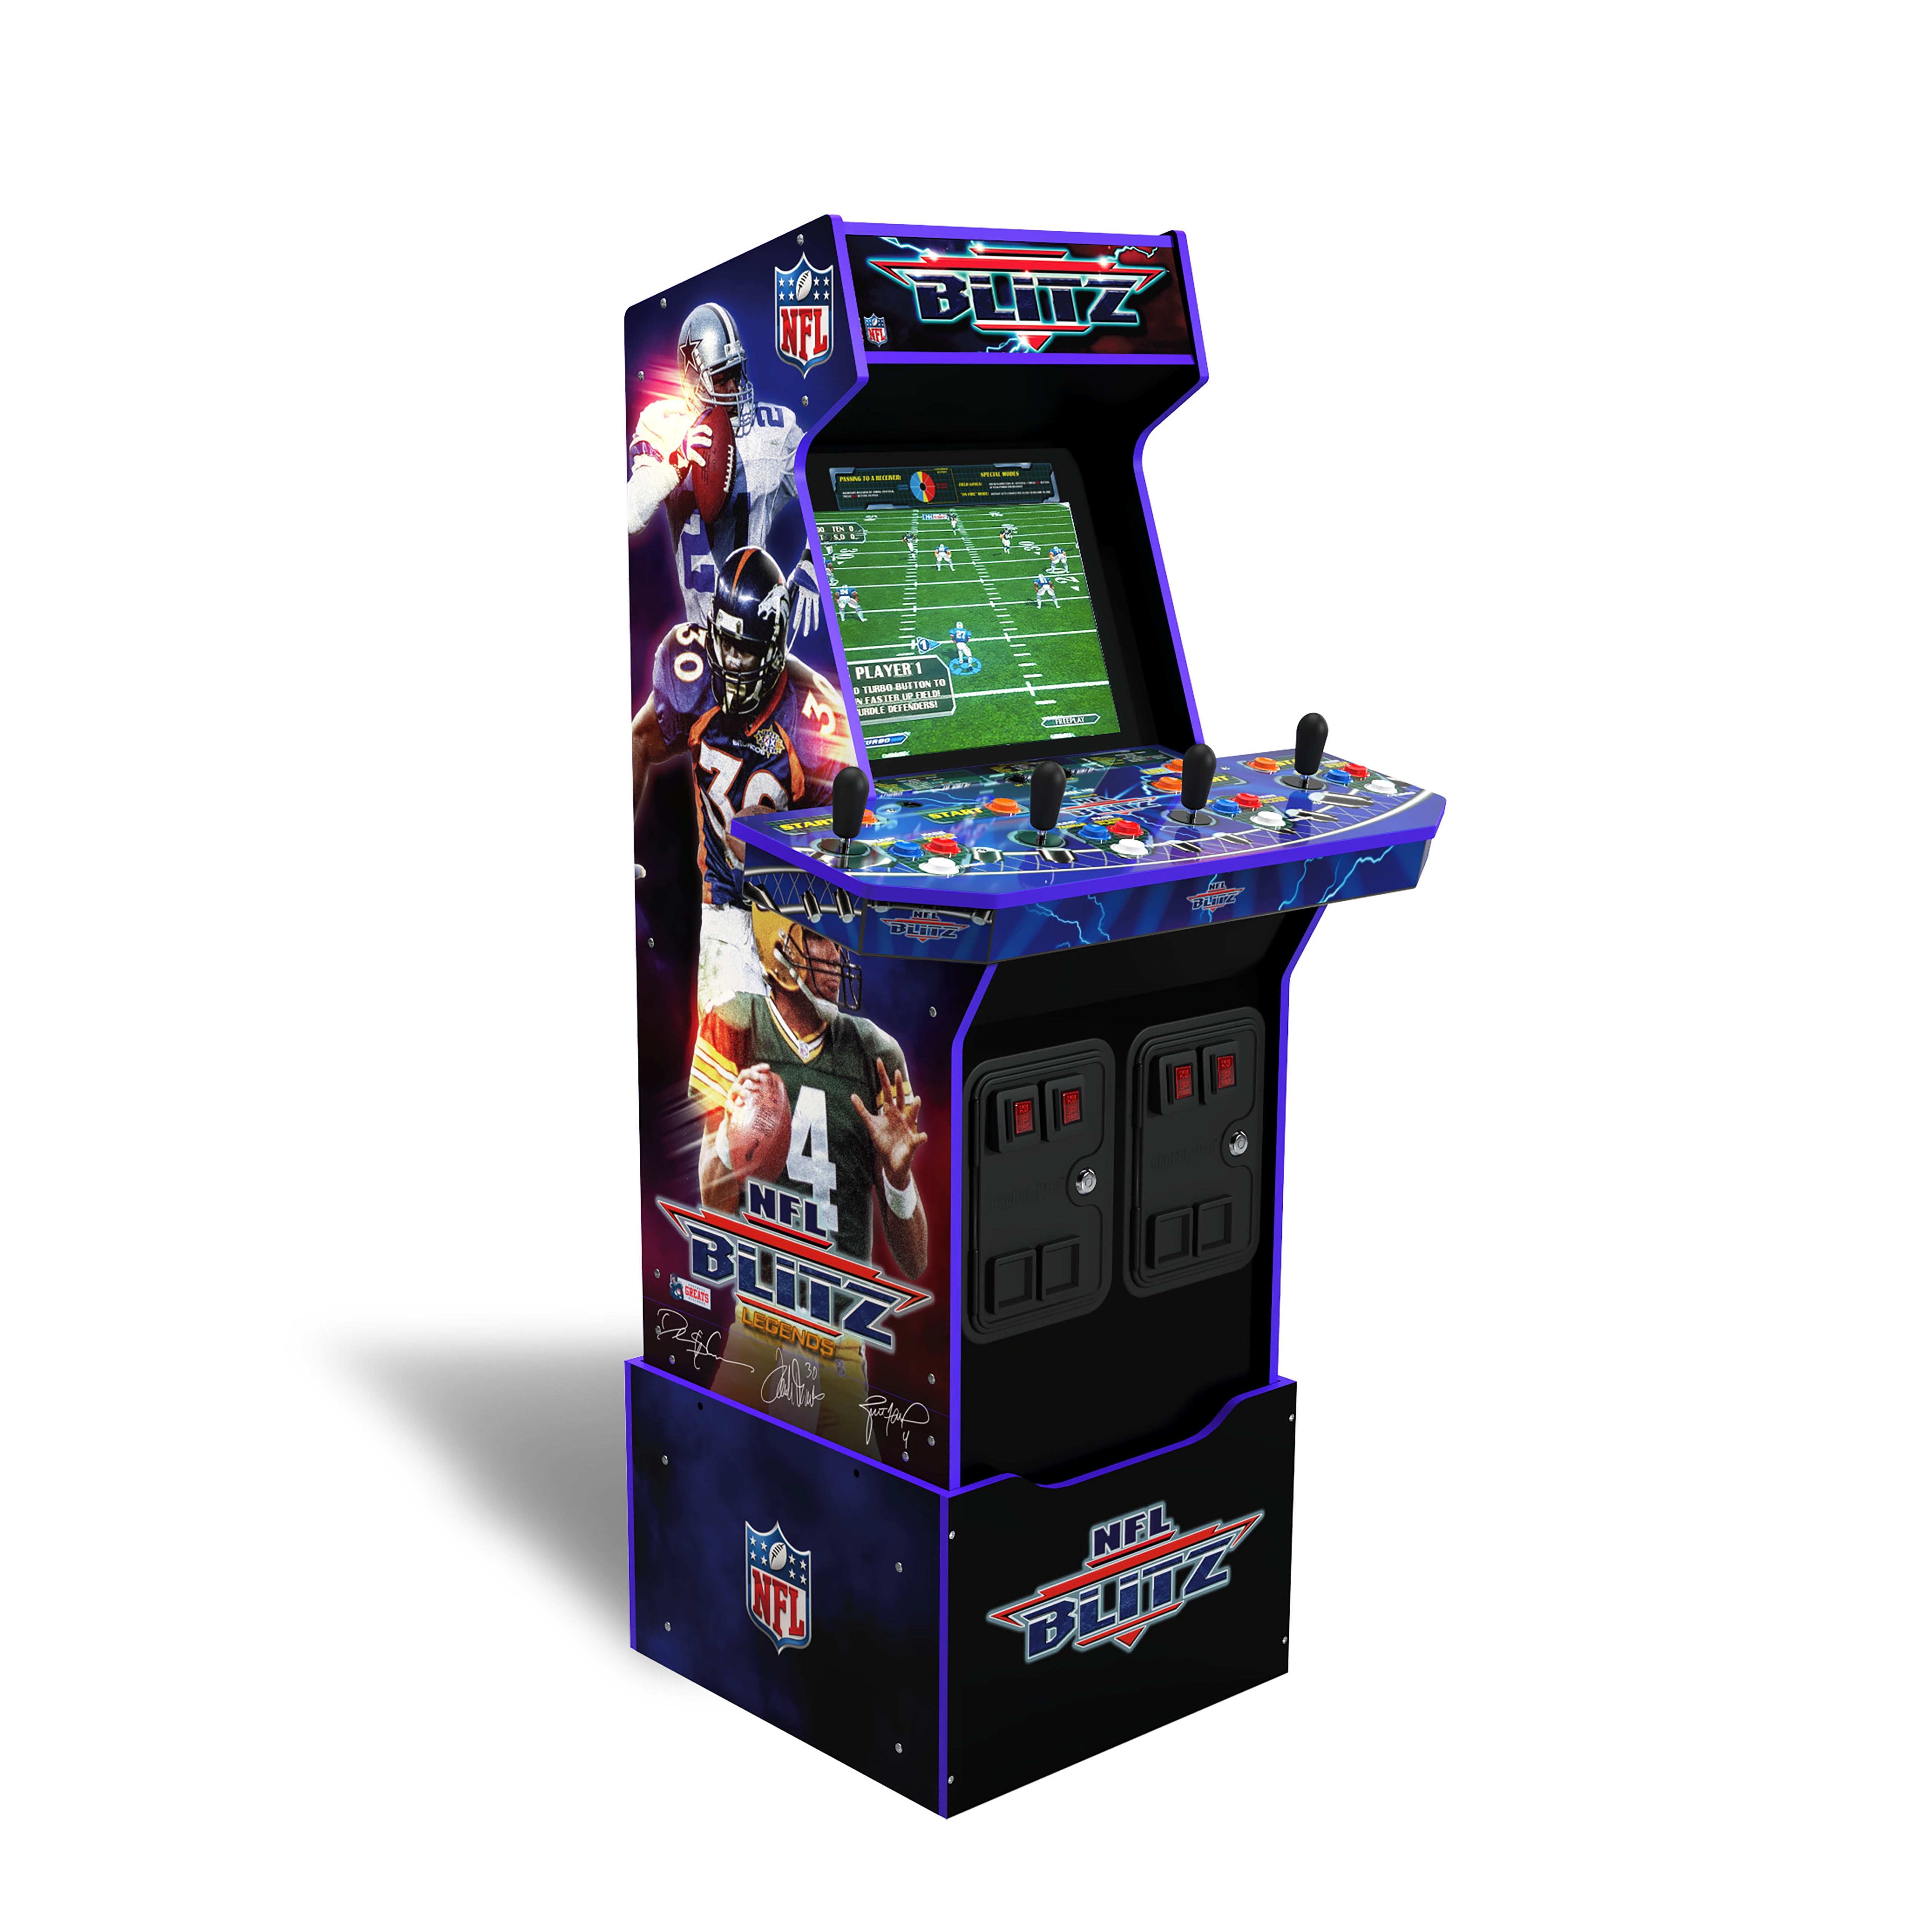 The Arcade1Up Deluxe has 12 retro games and is $100 off at Walmart